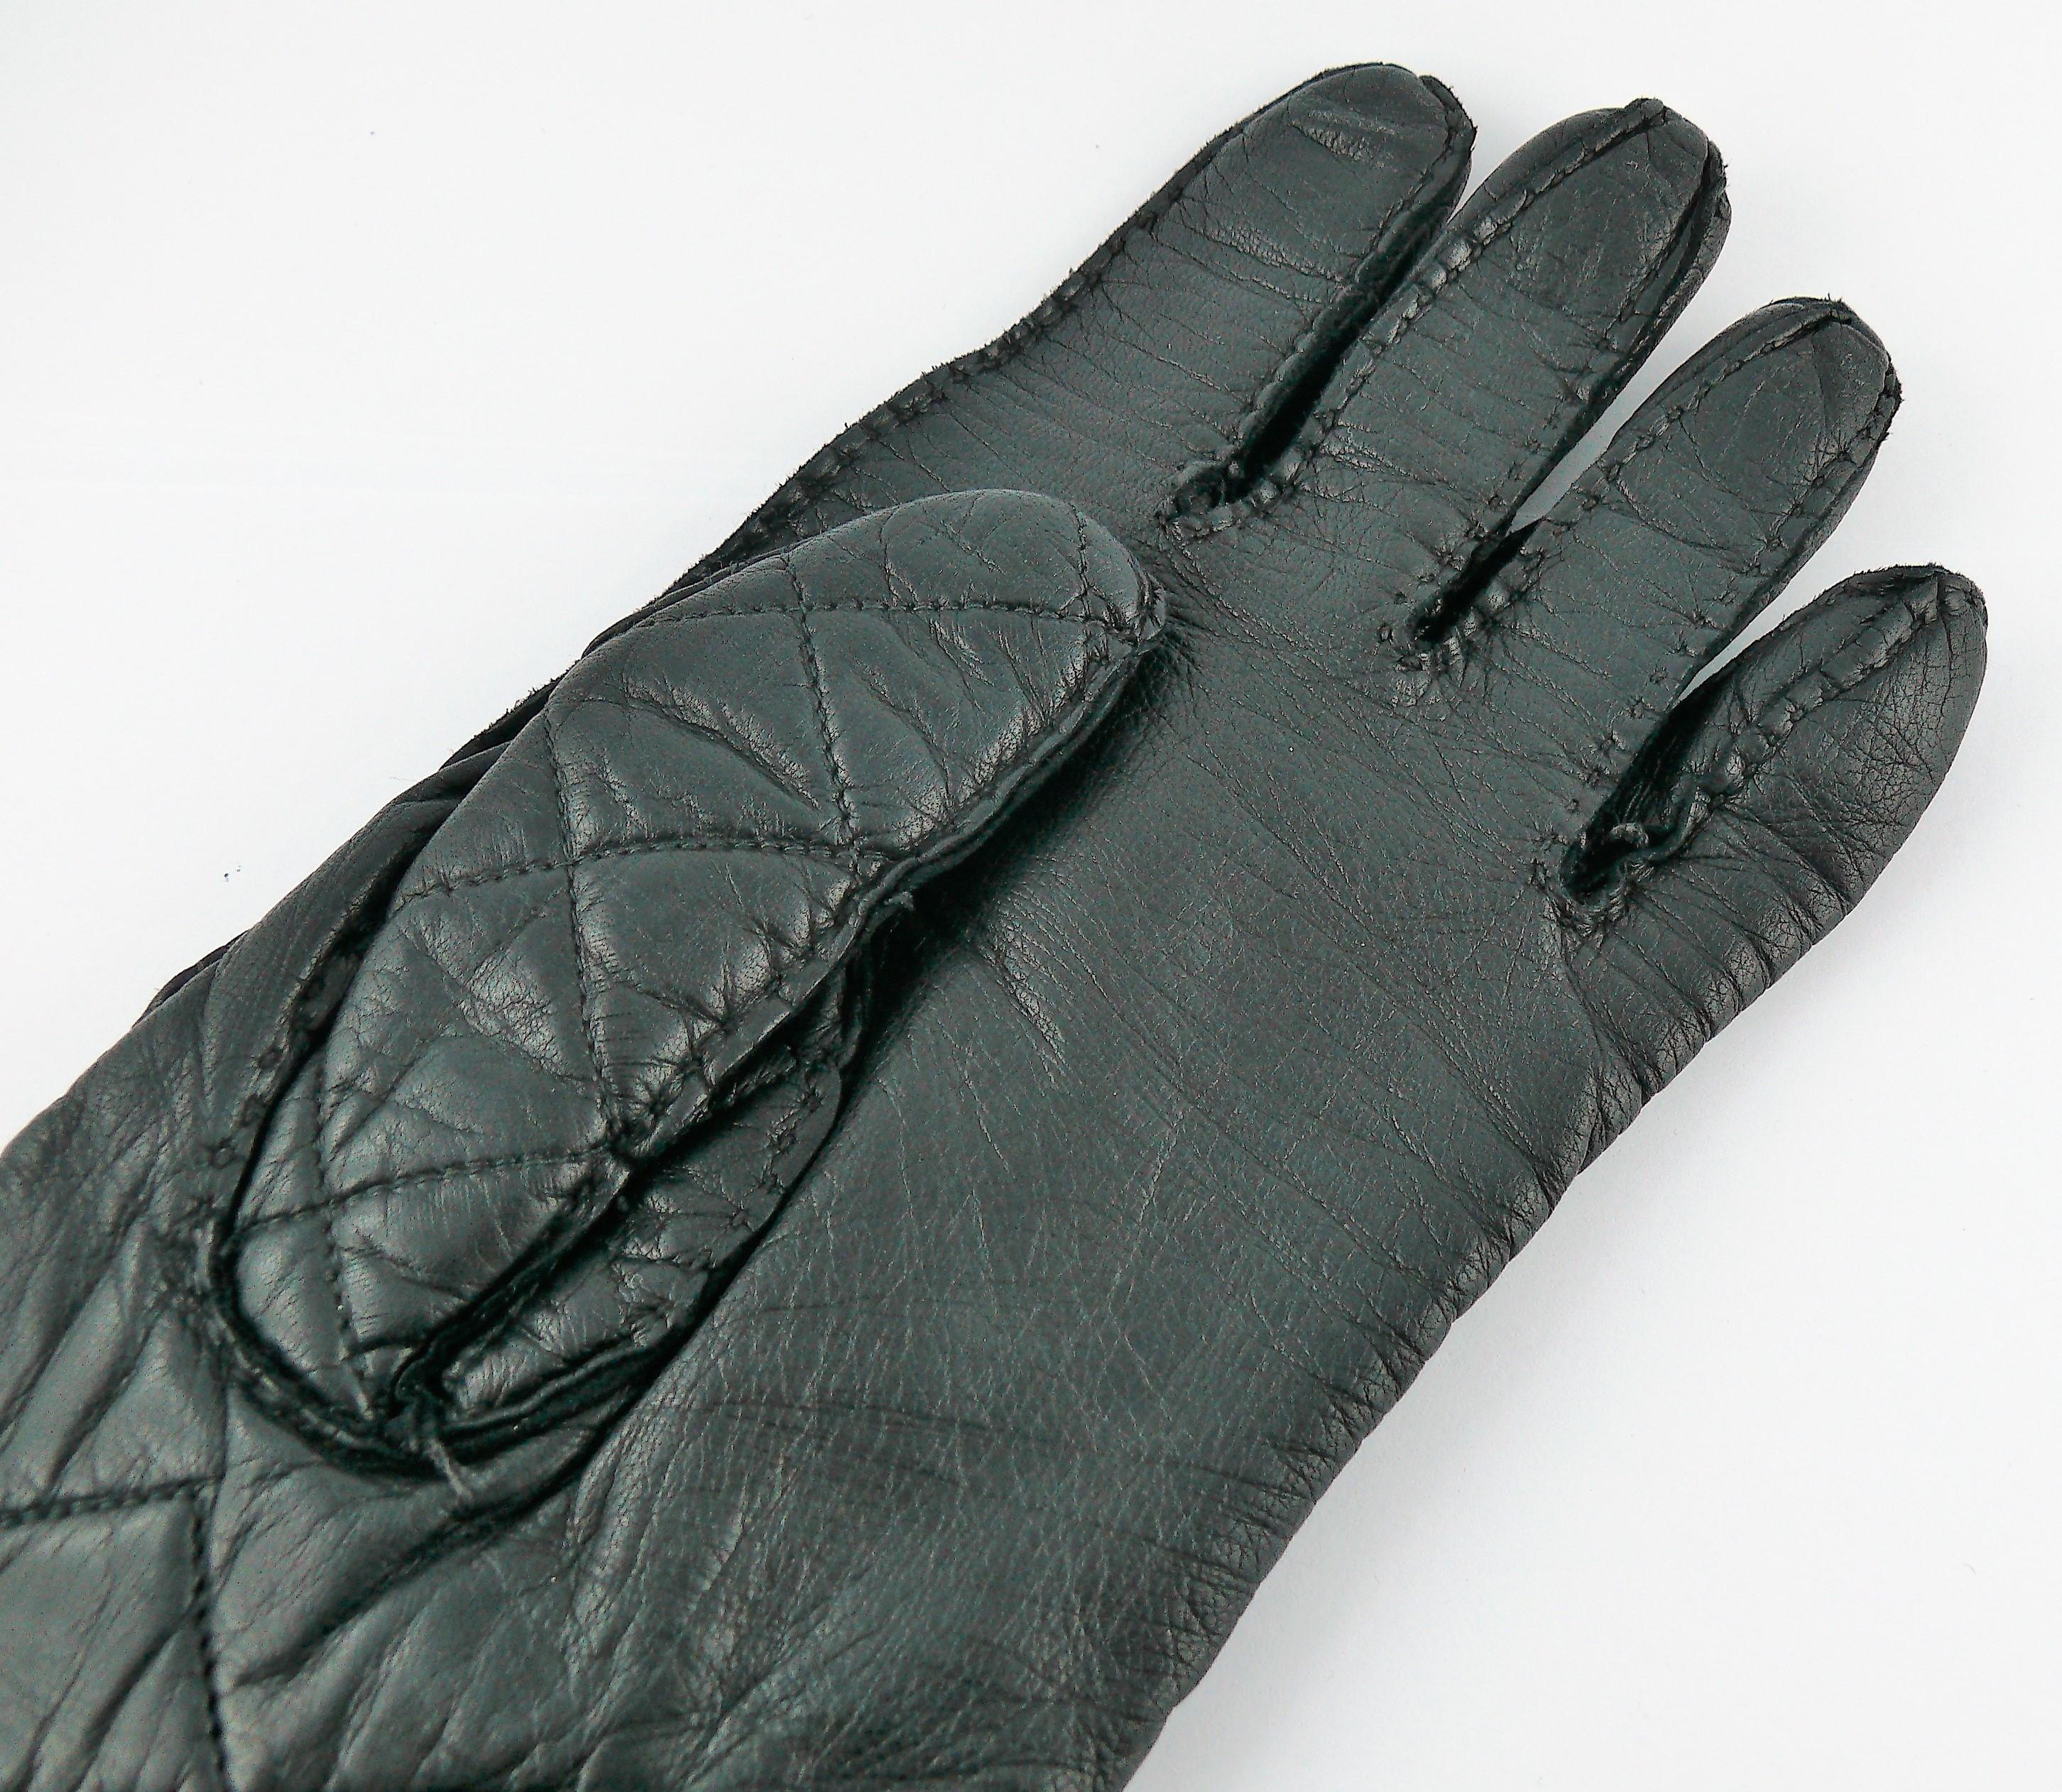 Chanel Vintage Iconic Black Quilted Kidskin Leather Rue Cambon Gloves Size 7 1/2 For Sale 6